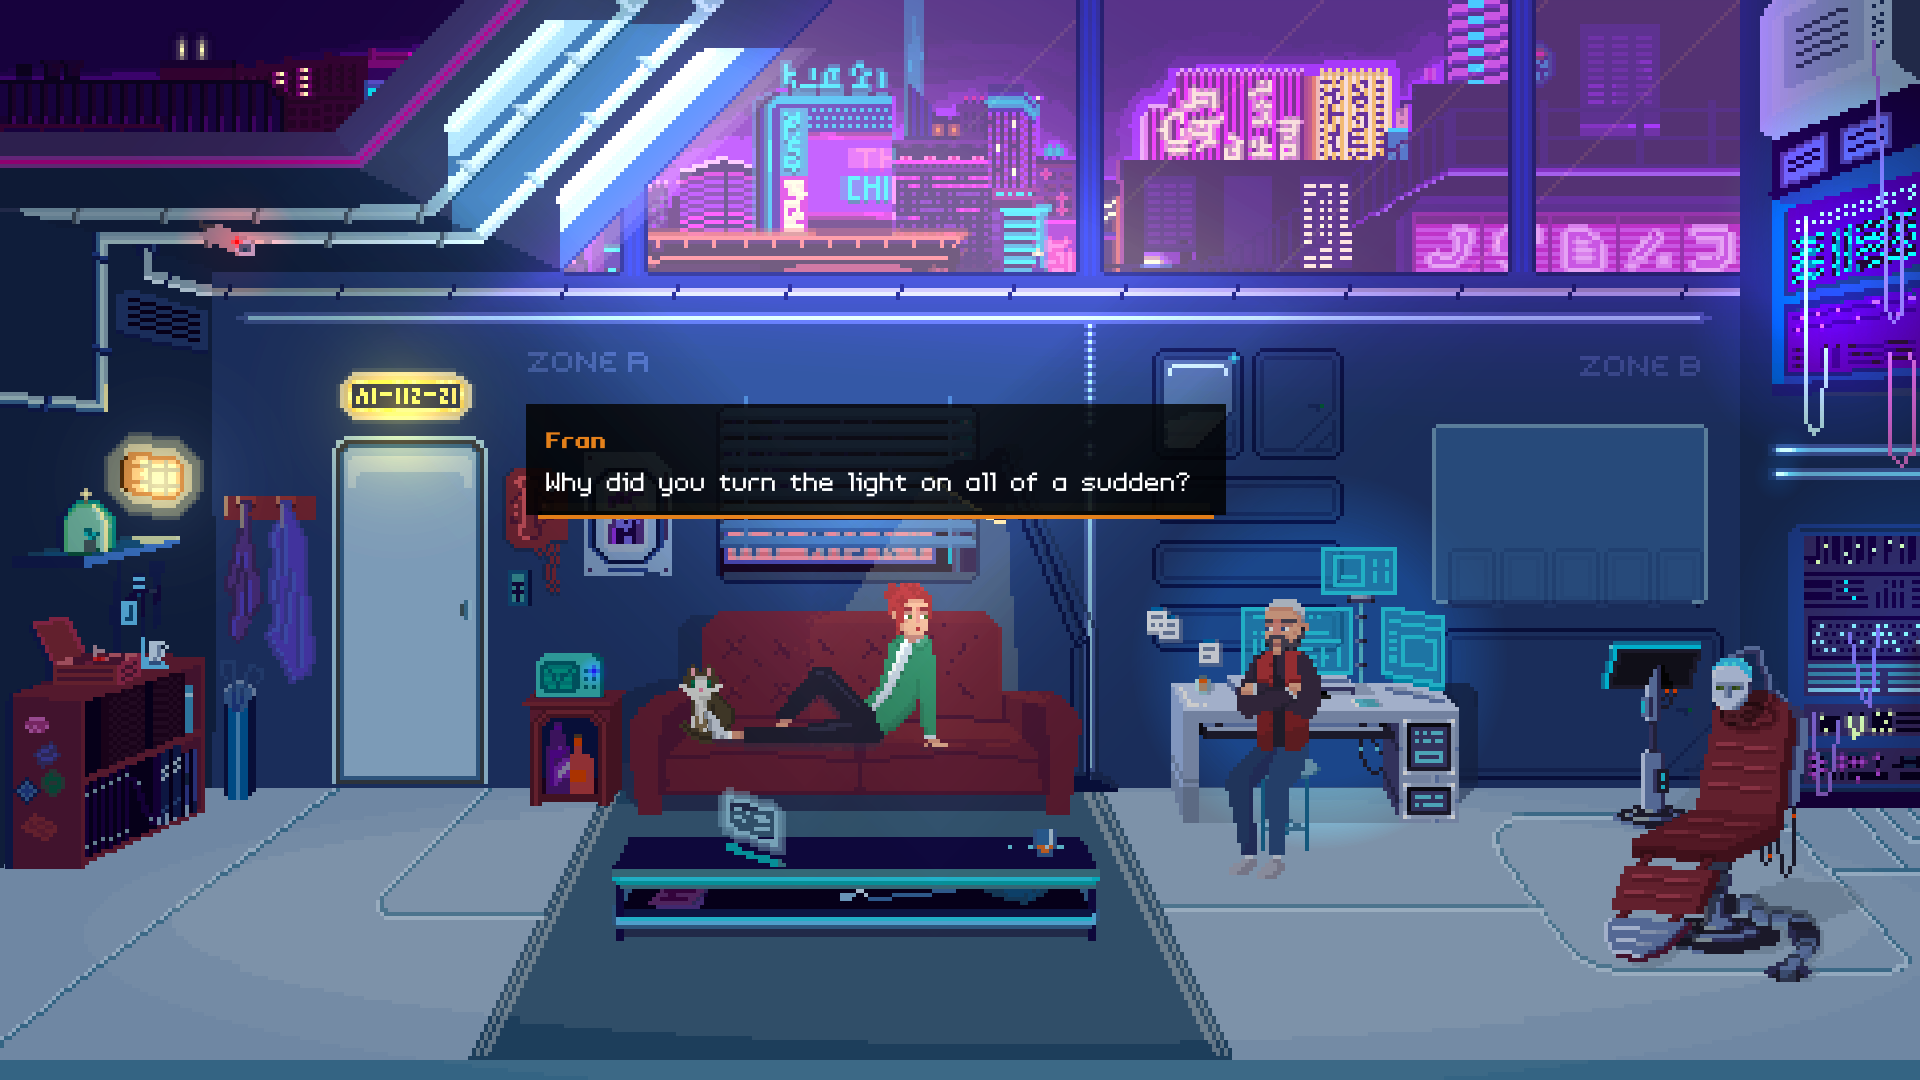 Dive Into Peoples Memories In This New Cyberpunk Adventure Game Pc Gamer 